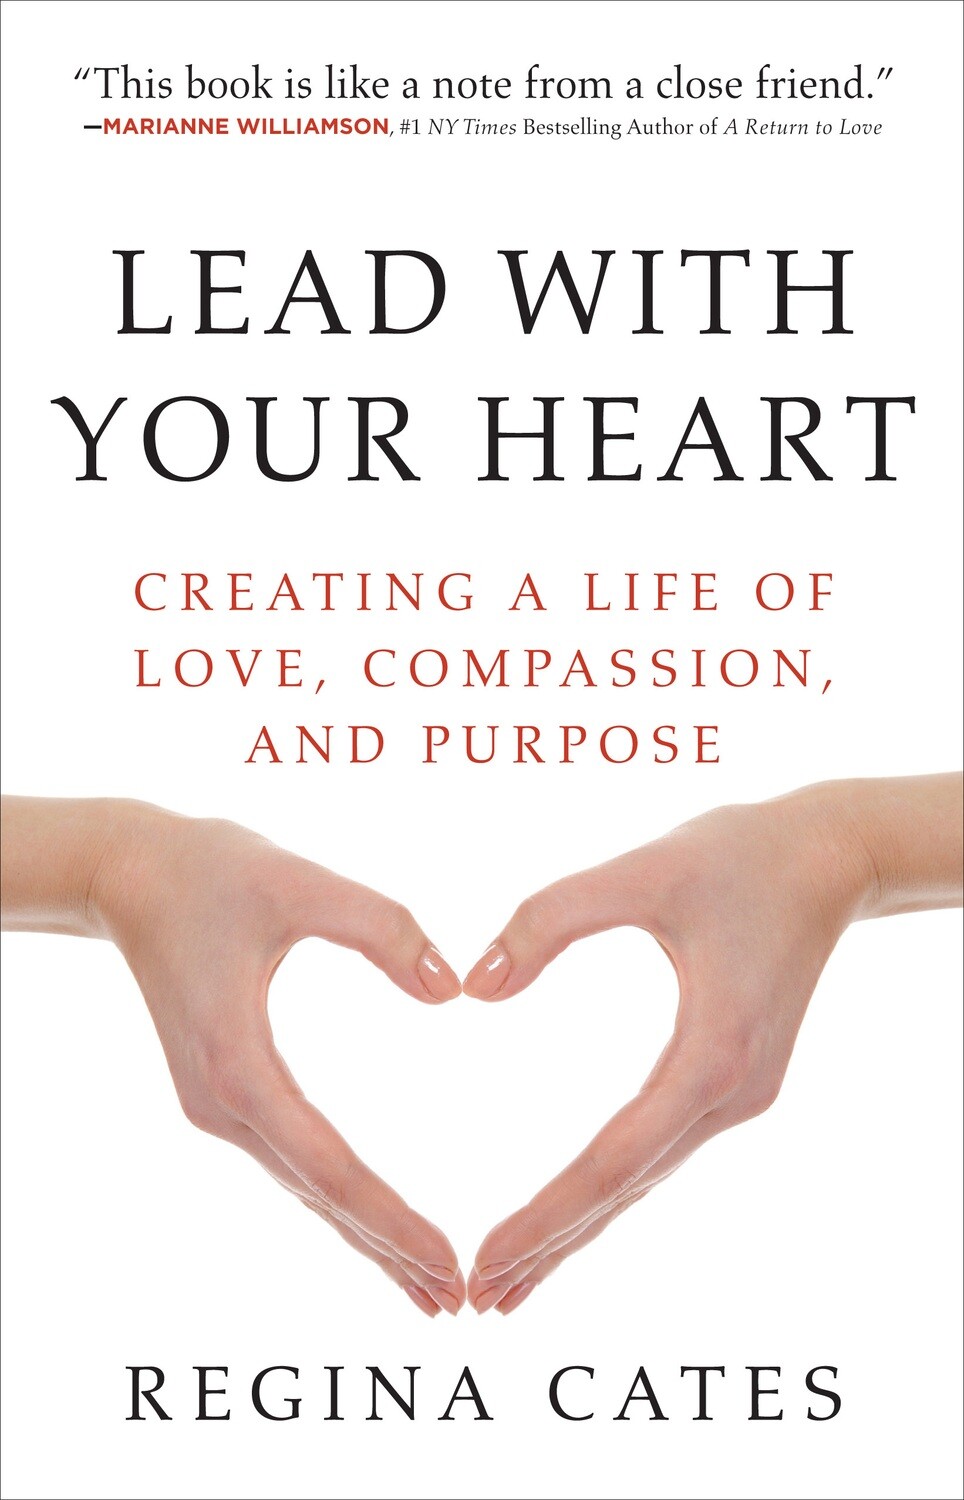 Lead With Your Heart